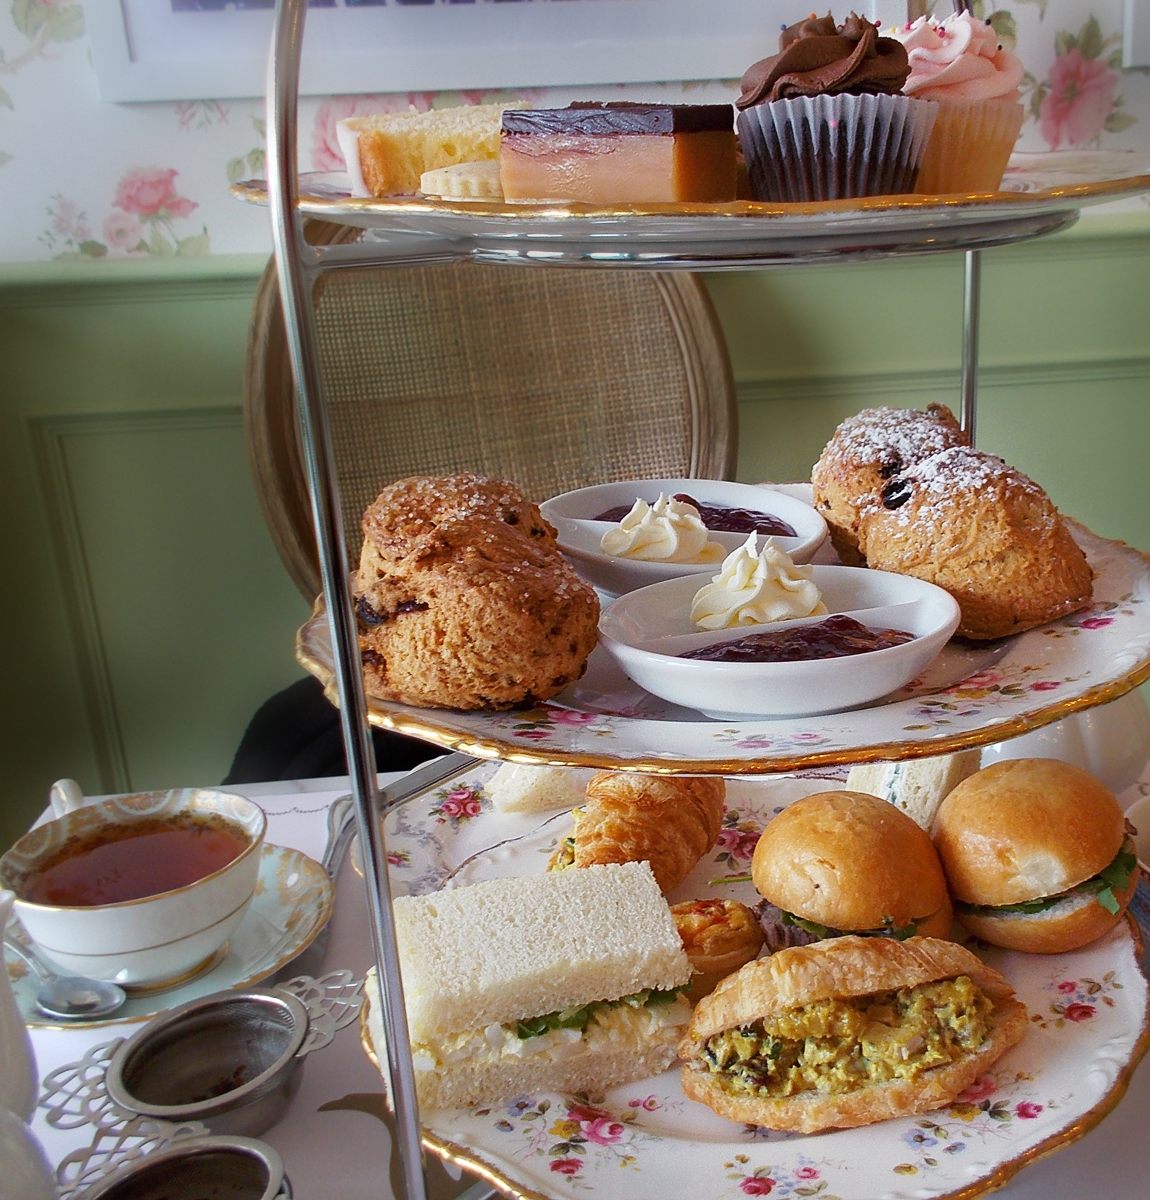 Blog Post Photo "Butter" Afternoon Tea, 3 Tiered Stand